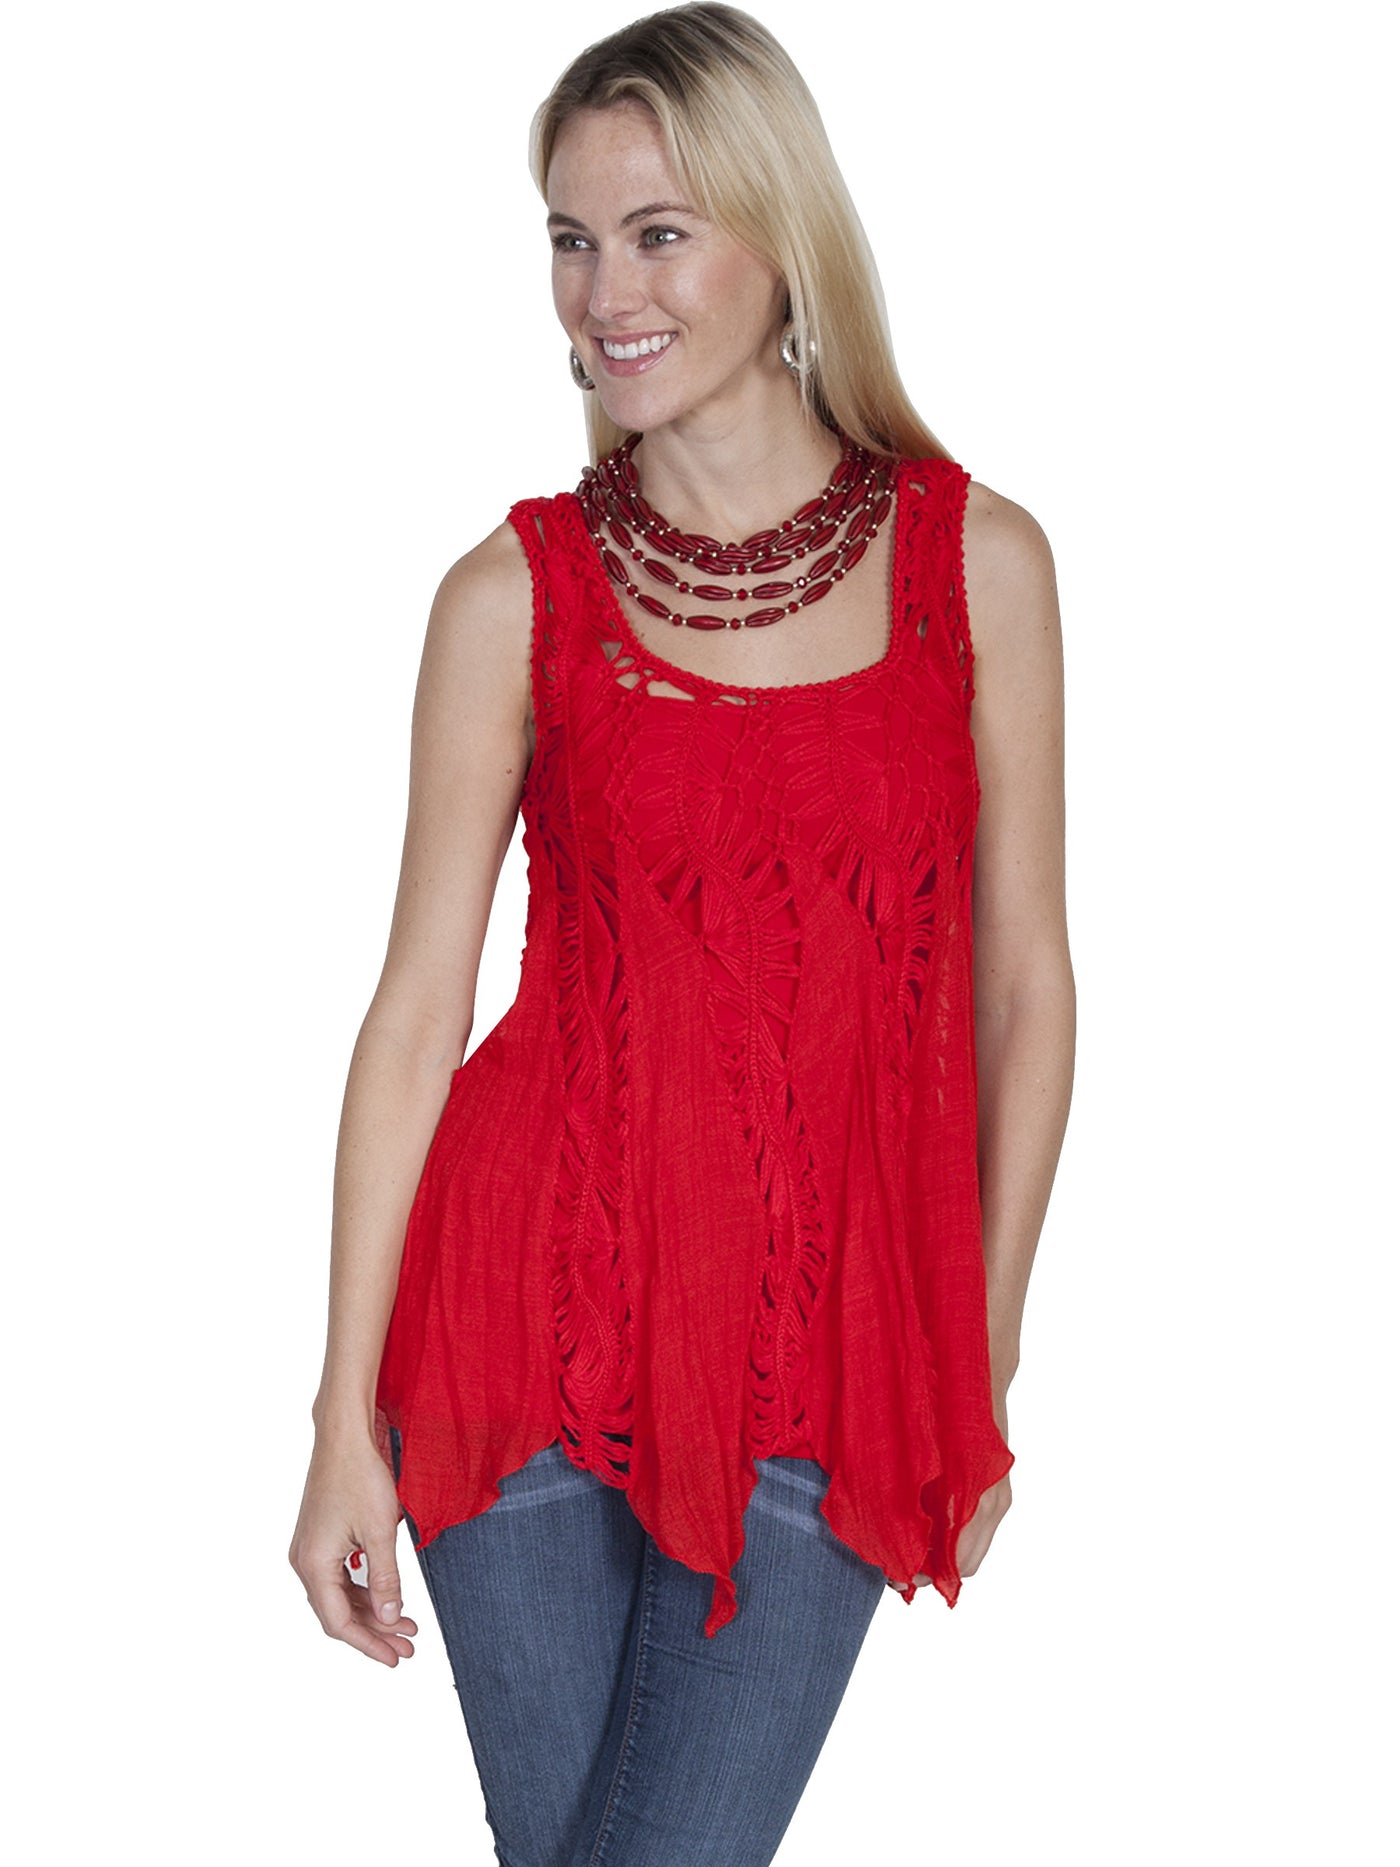 Vintage Inspired Crochet Top in Red - SOLD OUT